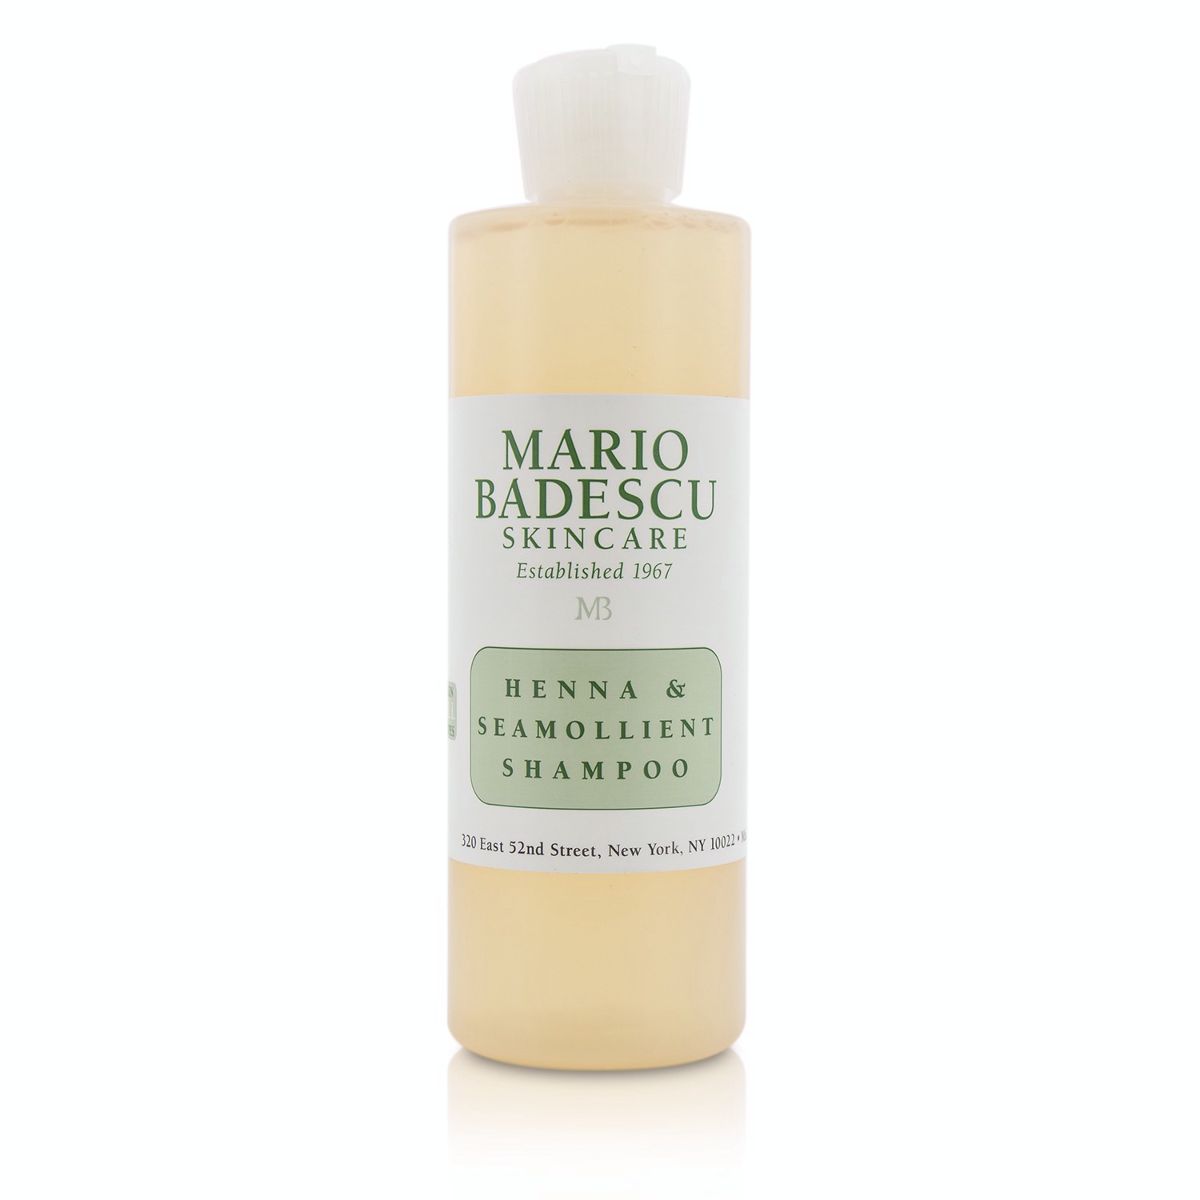 Henna  Seamollient Shampoo (For All Hair Types) Mario Badescu Image